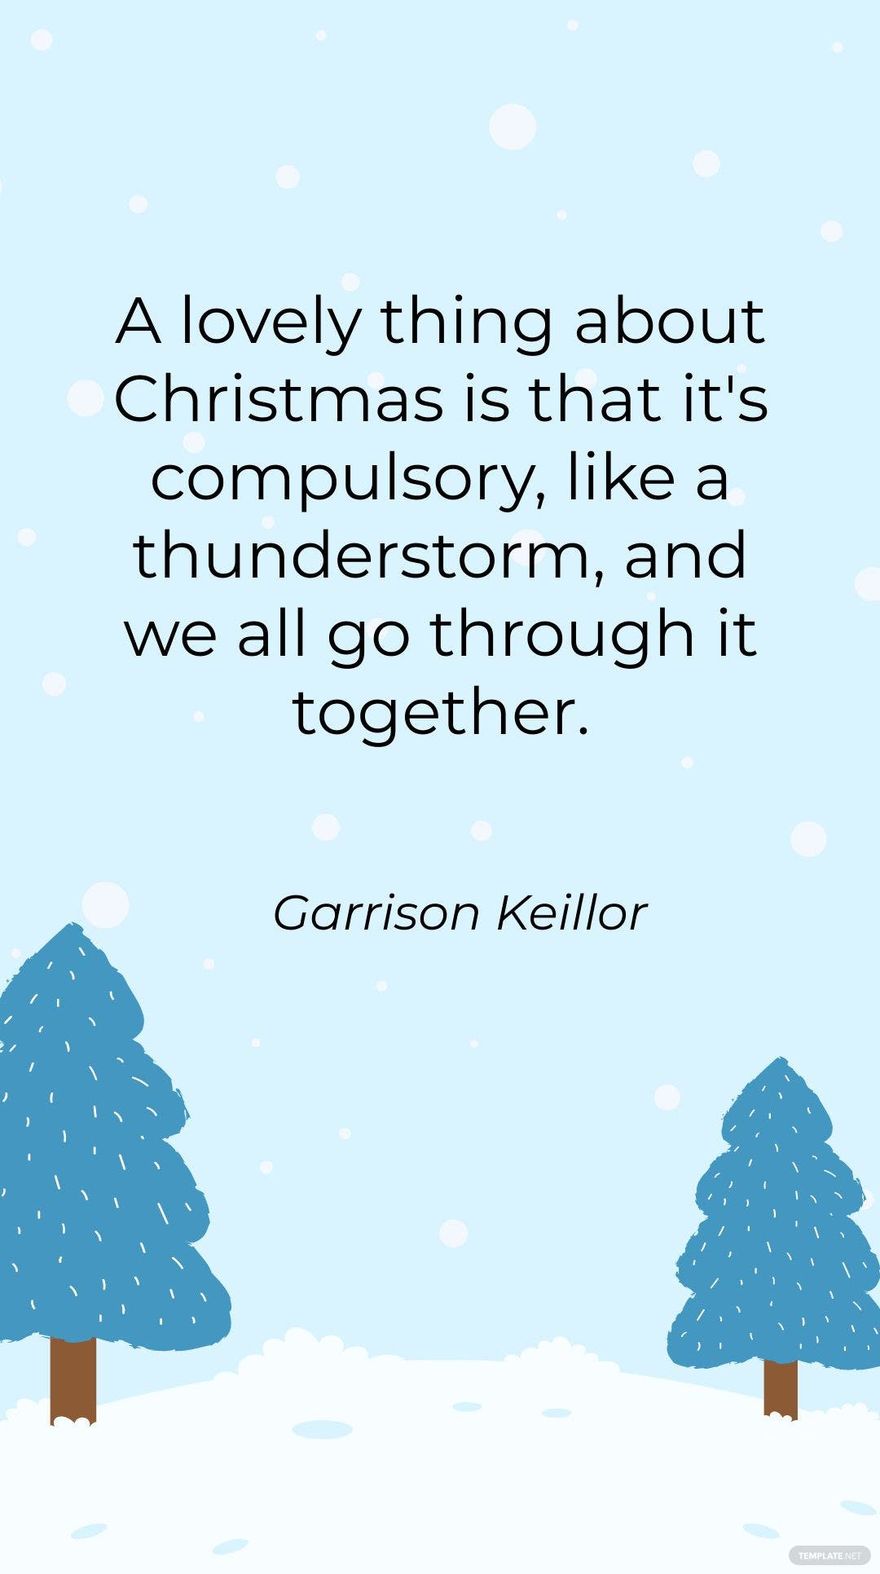 Free Garrison Keillor - A lovely thing about Christmas is that it's compulsory, like a thunderstorm, and we all go through it together. in JPG